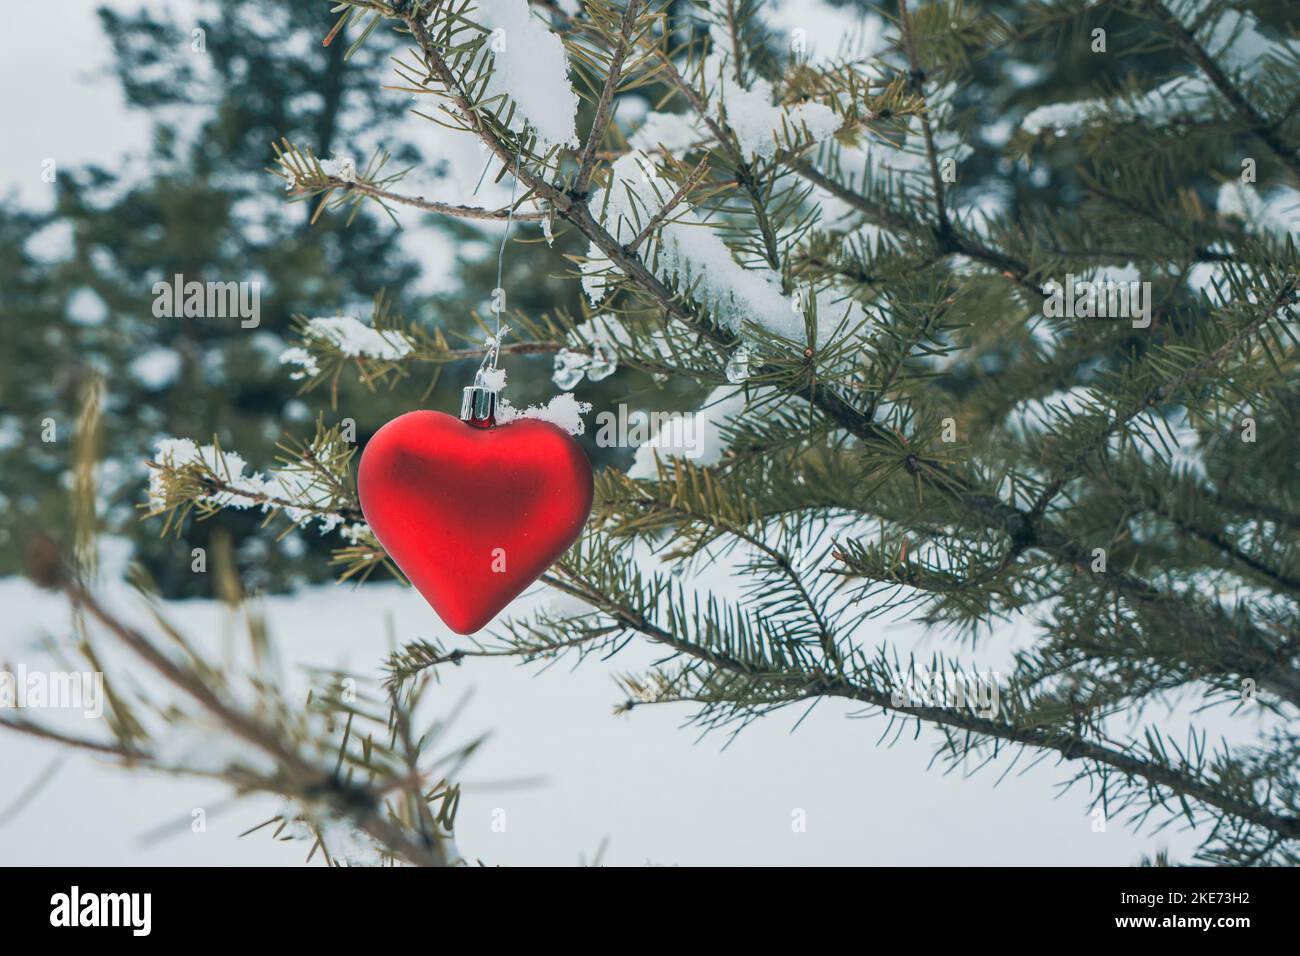 A red heart shaped ornament hangs on a snow covered tree branch Stock Photo